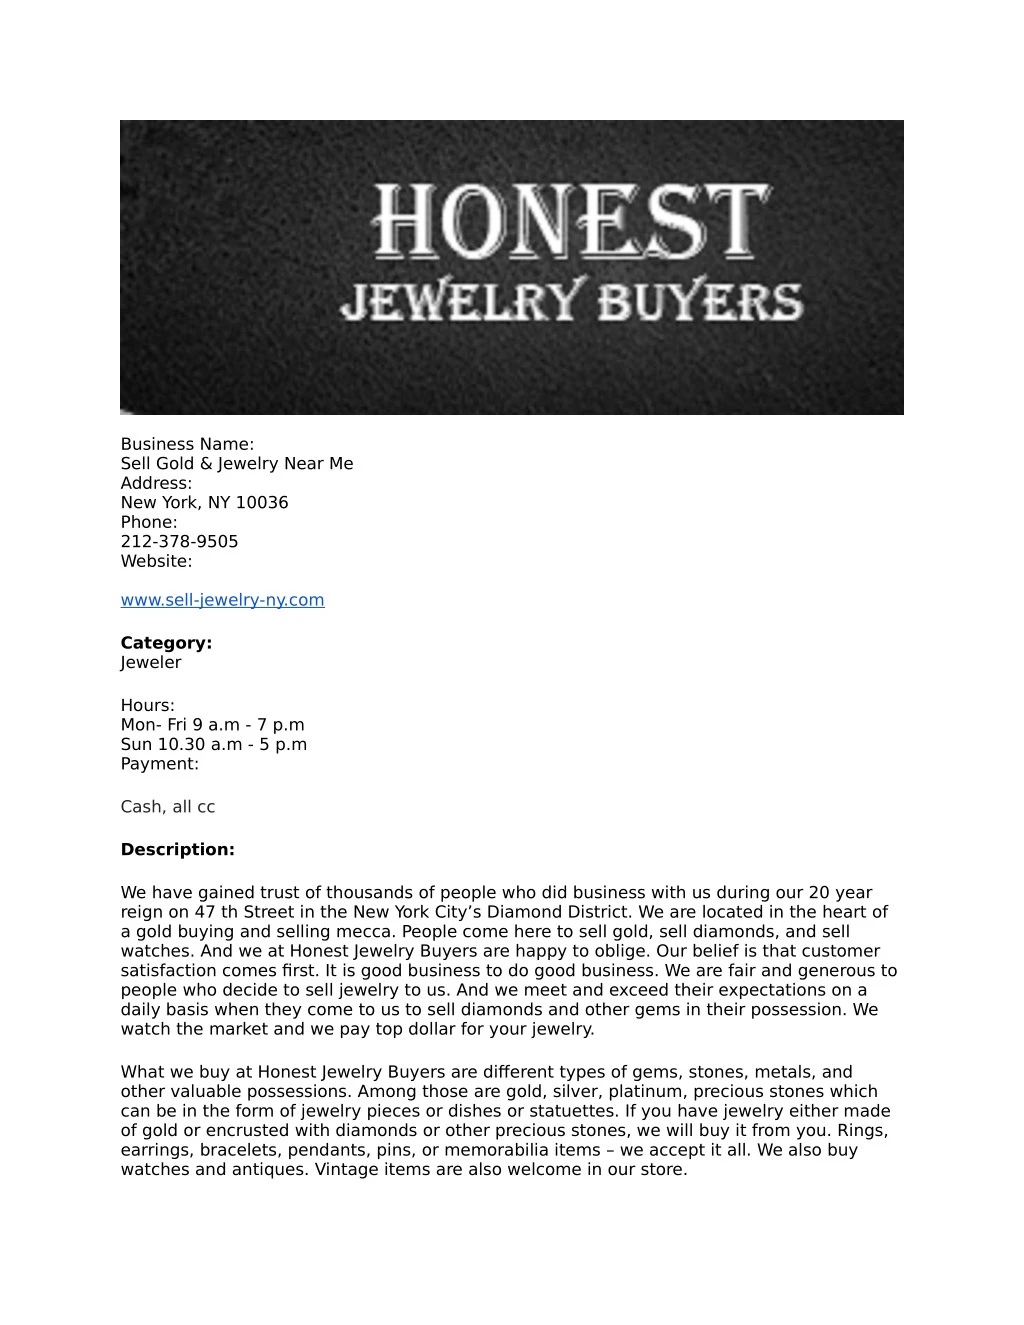 business name sell gold jewelry near me address